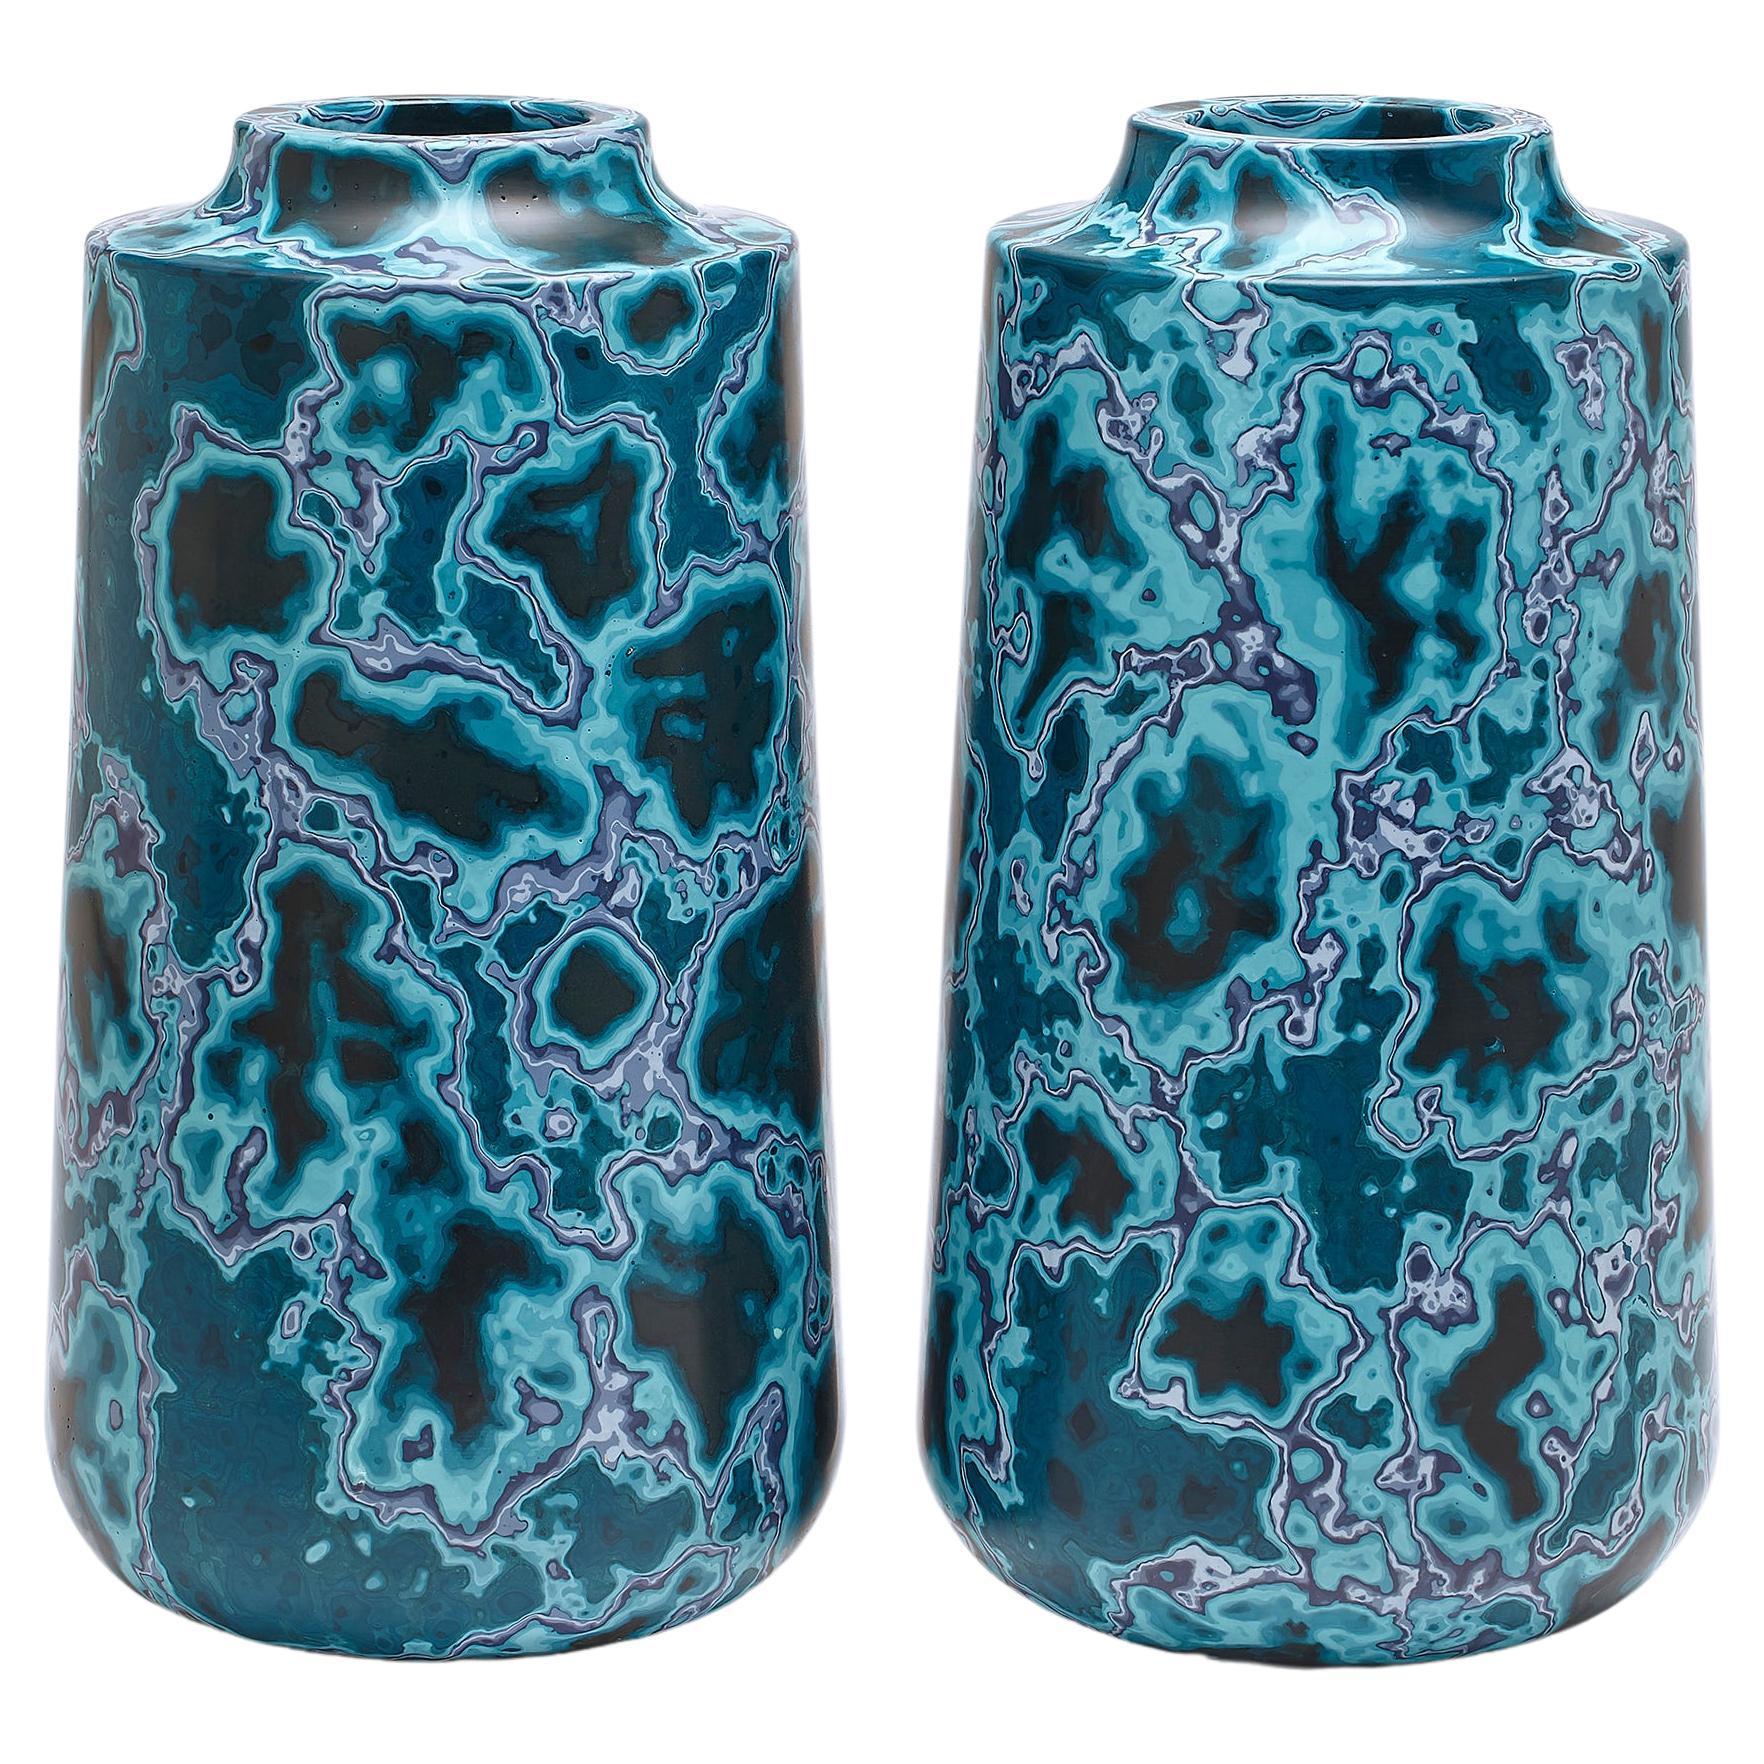 Aquarian Stone, Contemporary Pair of Blue Vases / Vessels by Nic Parnell